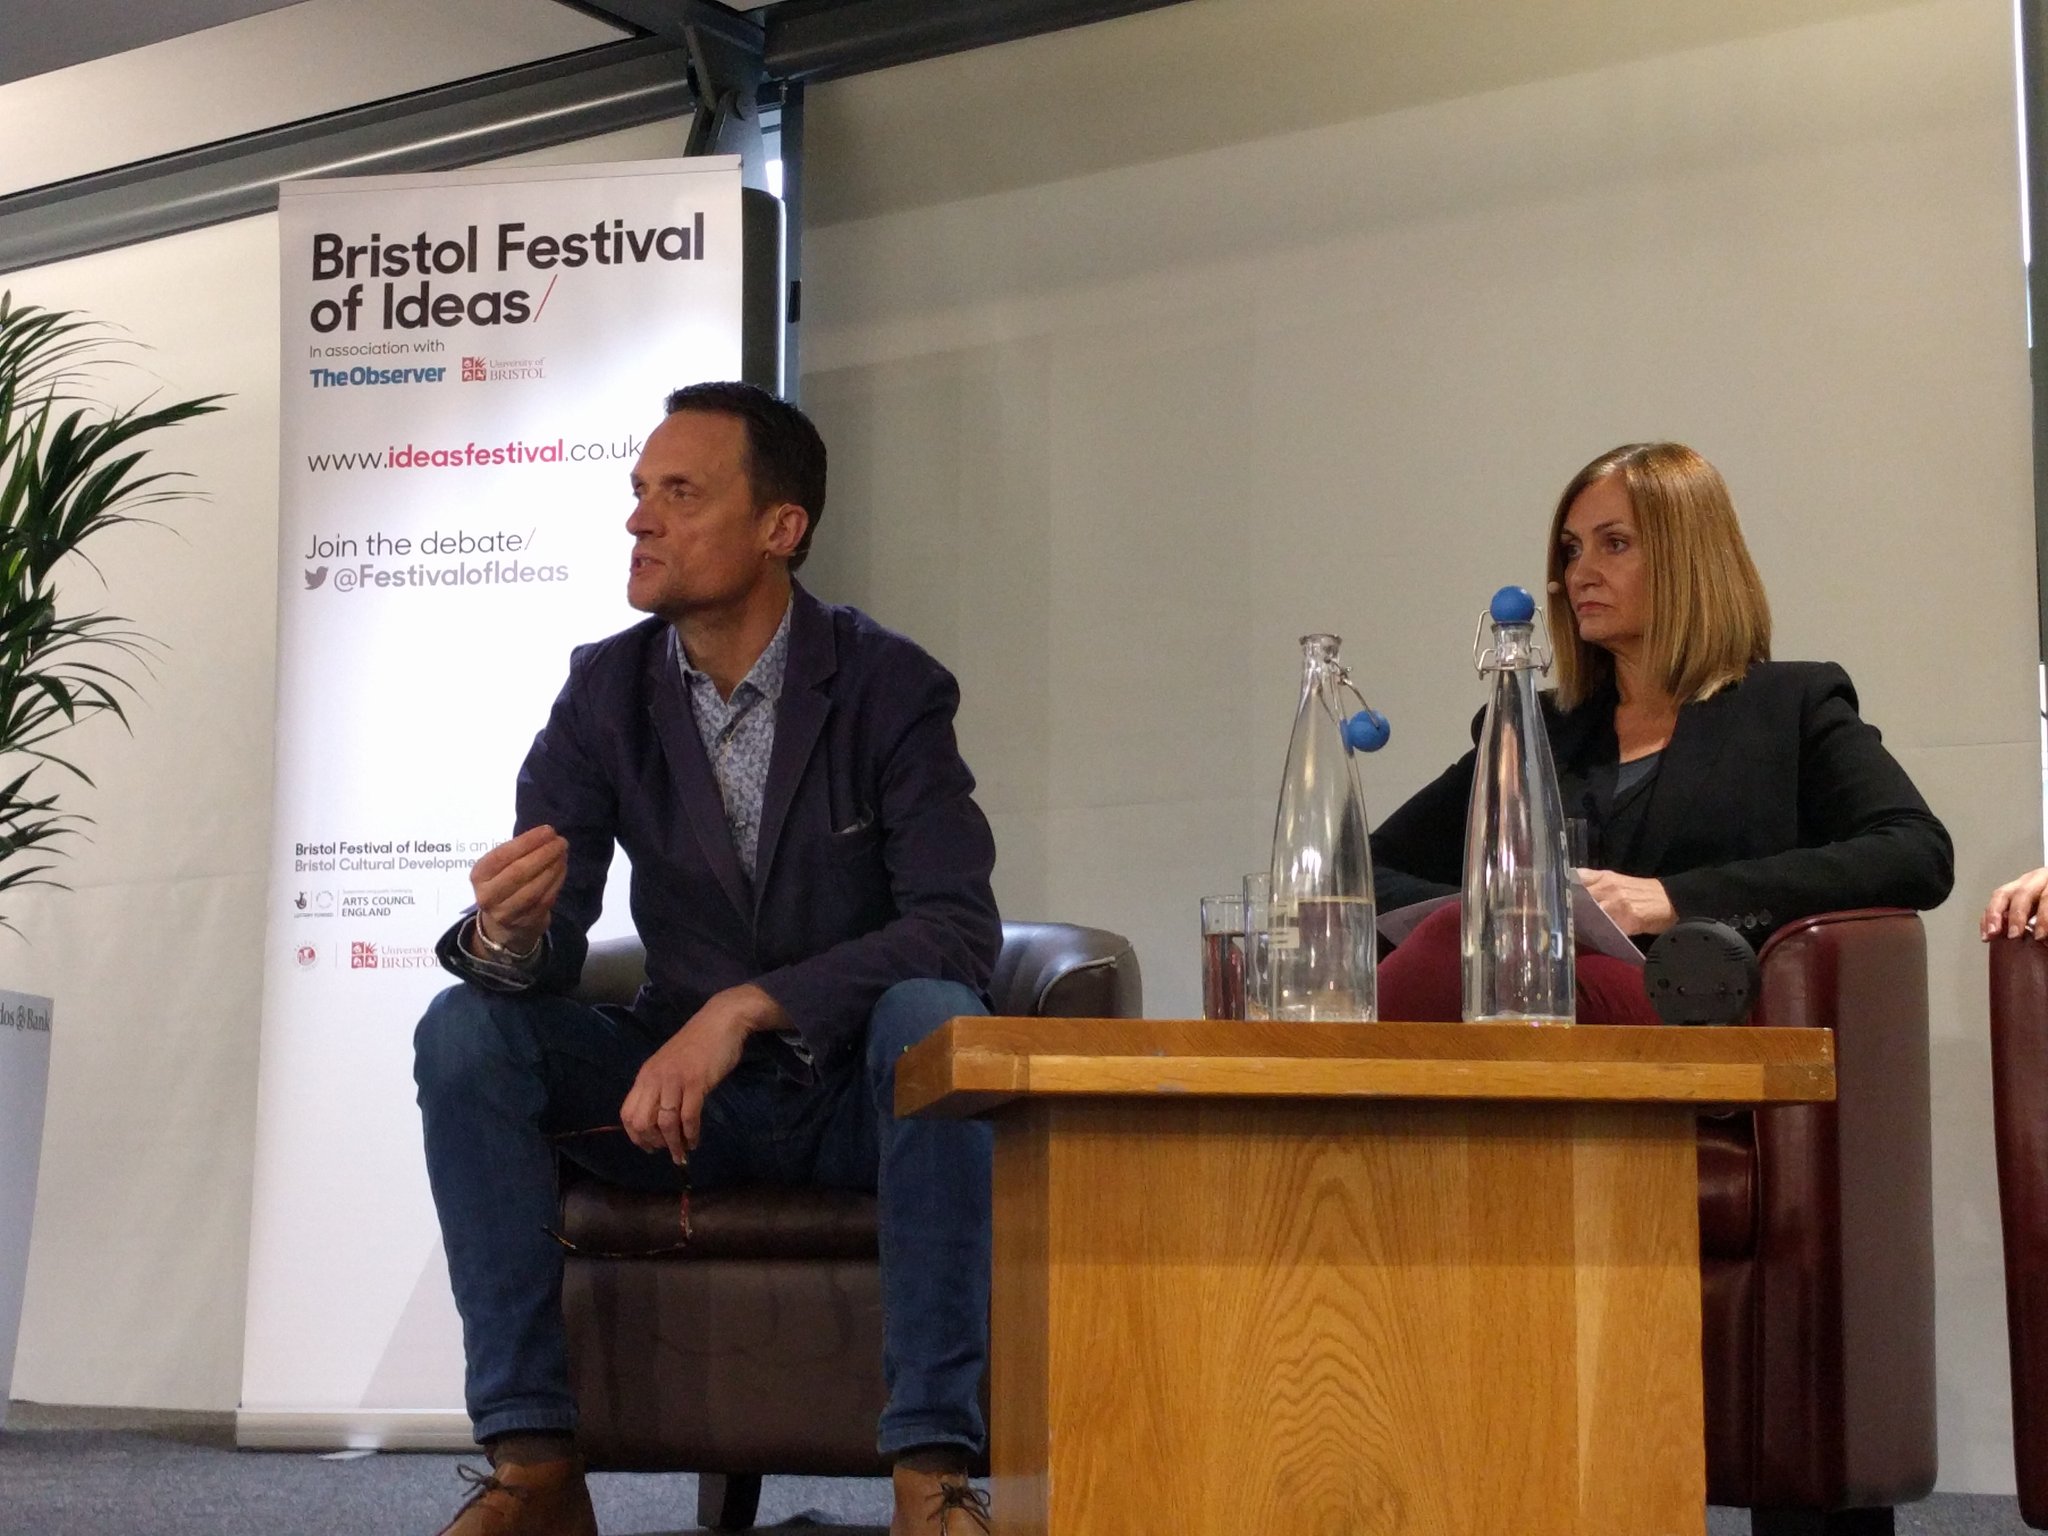 First speaker of the day - Matthew Taylor on the "arrogant account of globalisation" and its parallels for the Robot Revolution #economicsfest https://t.co/g9BglAYQwg